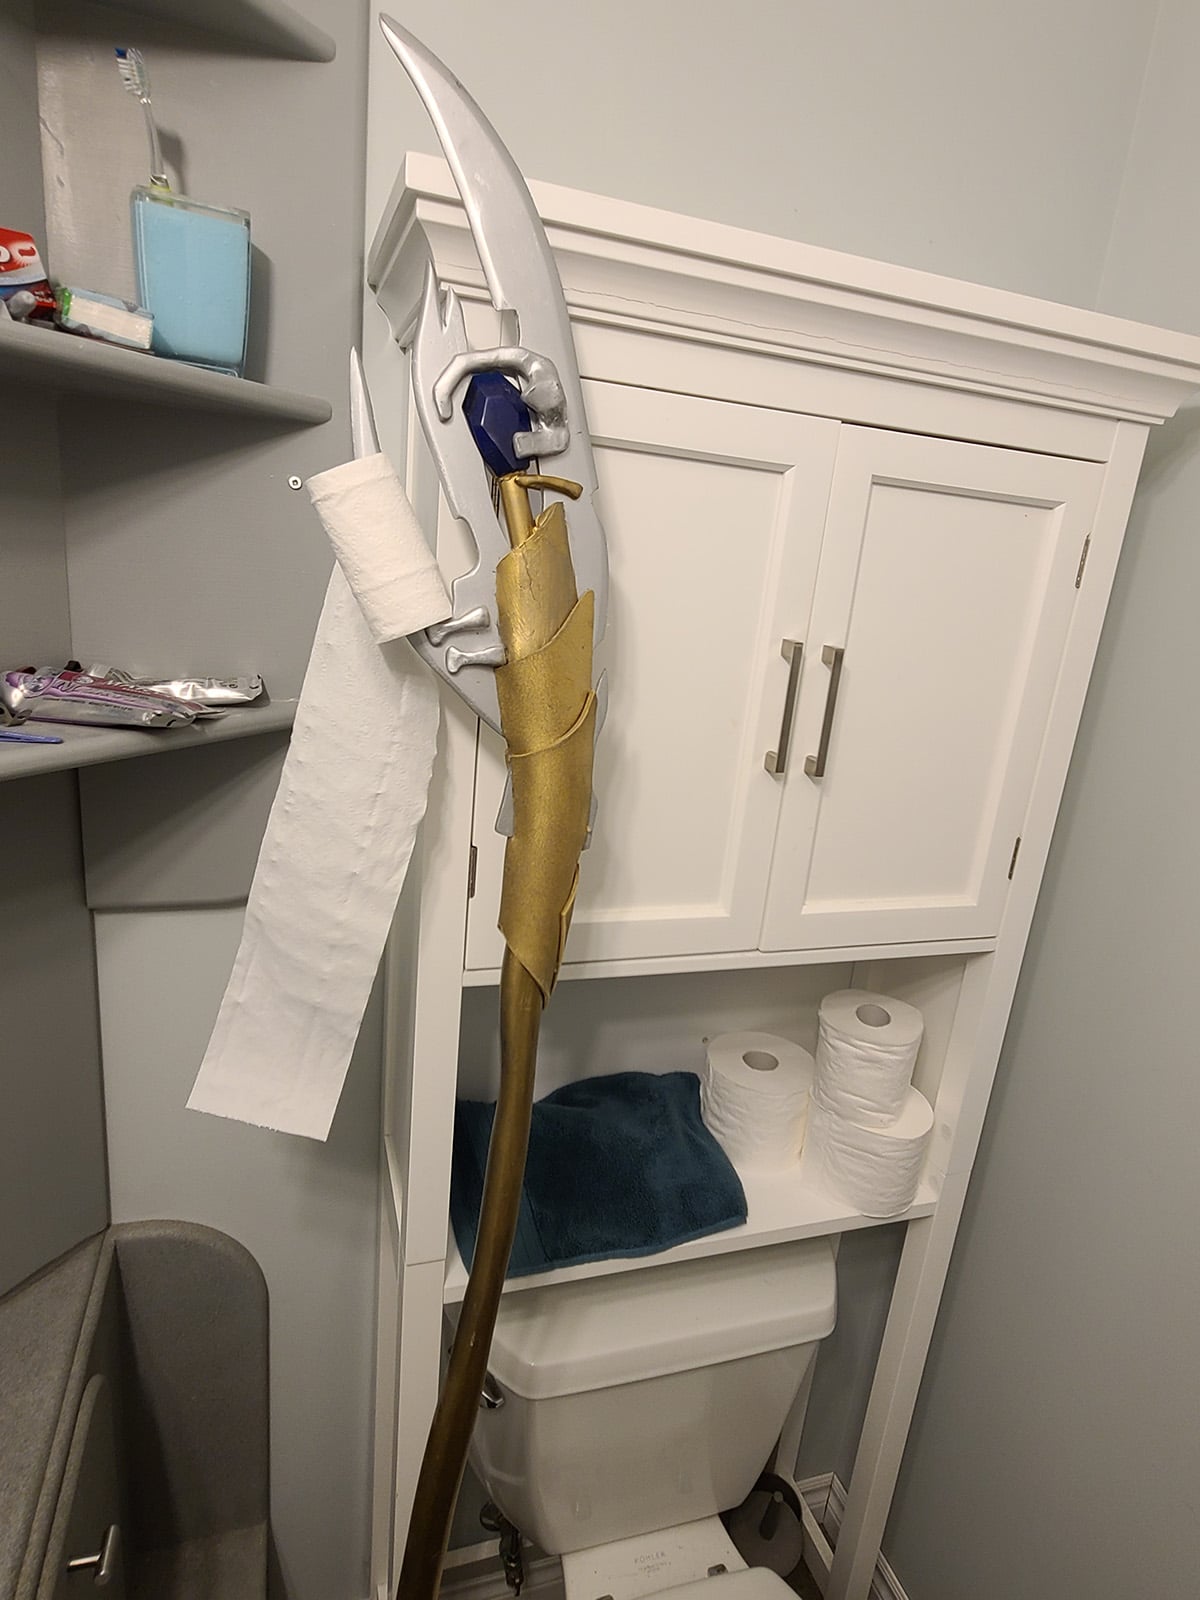 Loki's Scepter, holding a roll of toilet paper, leaning on the back of a toilet.